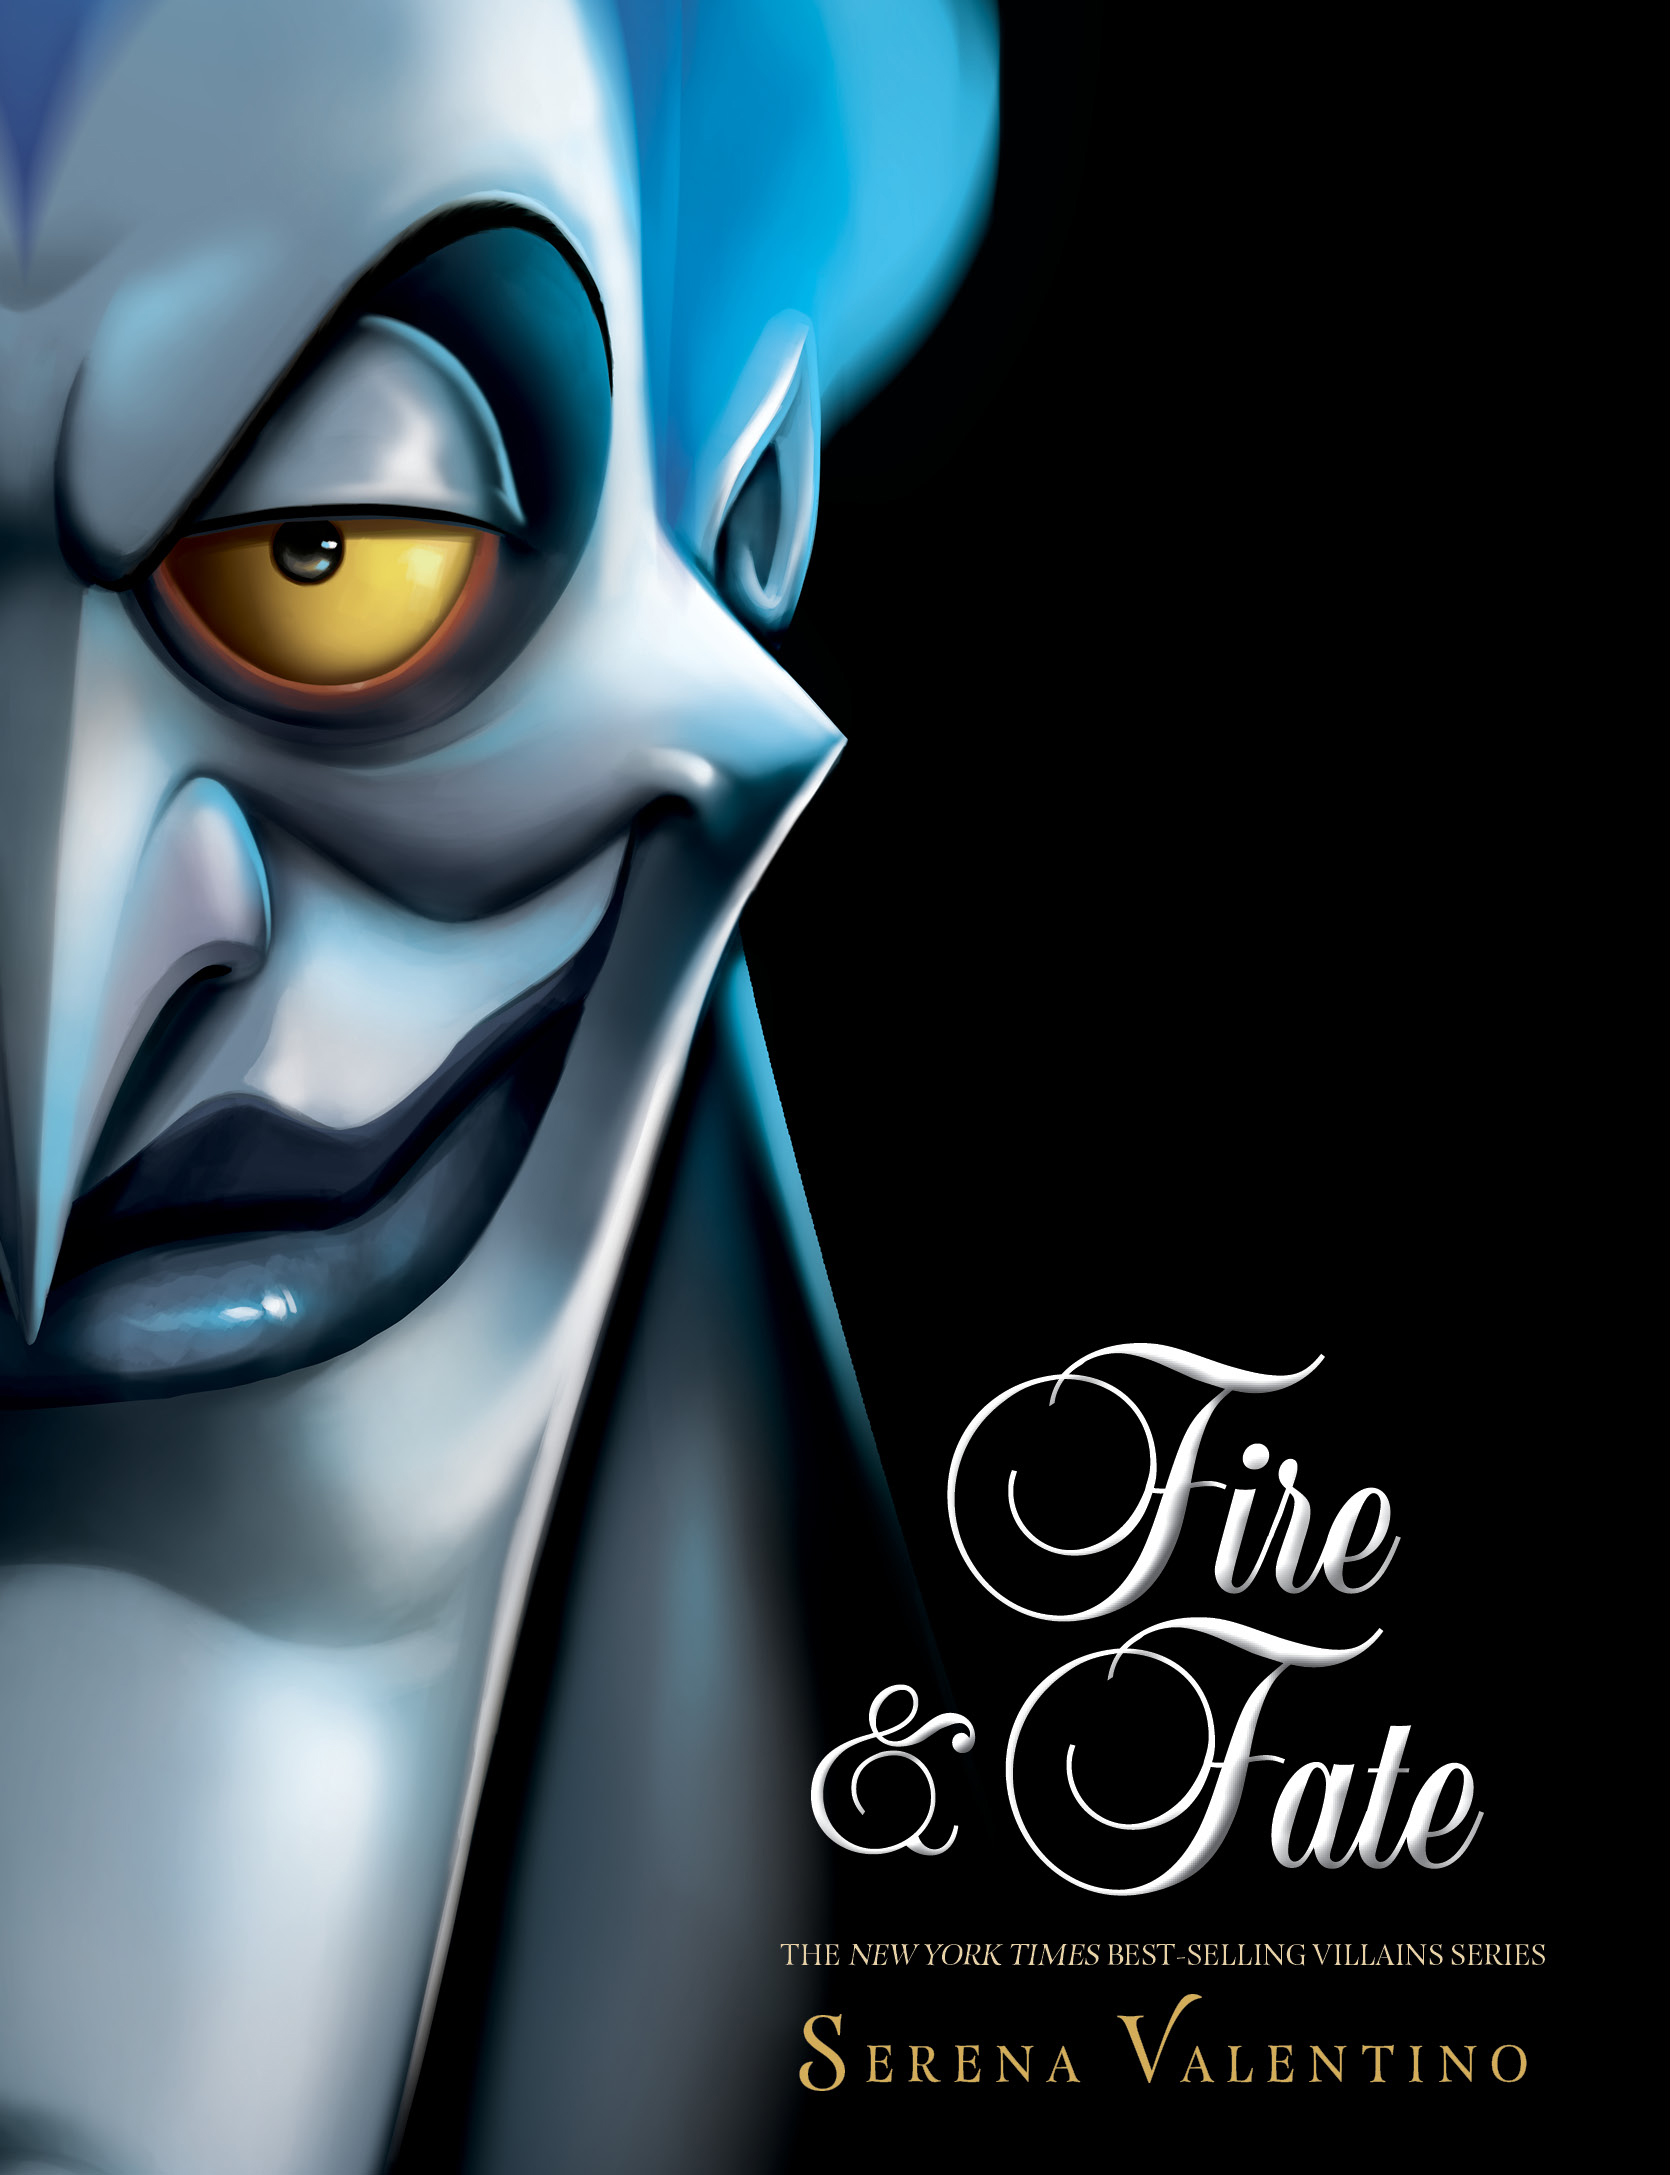 Fire and Fate by Serena Valentino - Villains - Disney Villains Books